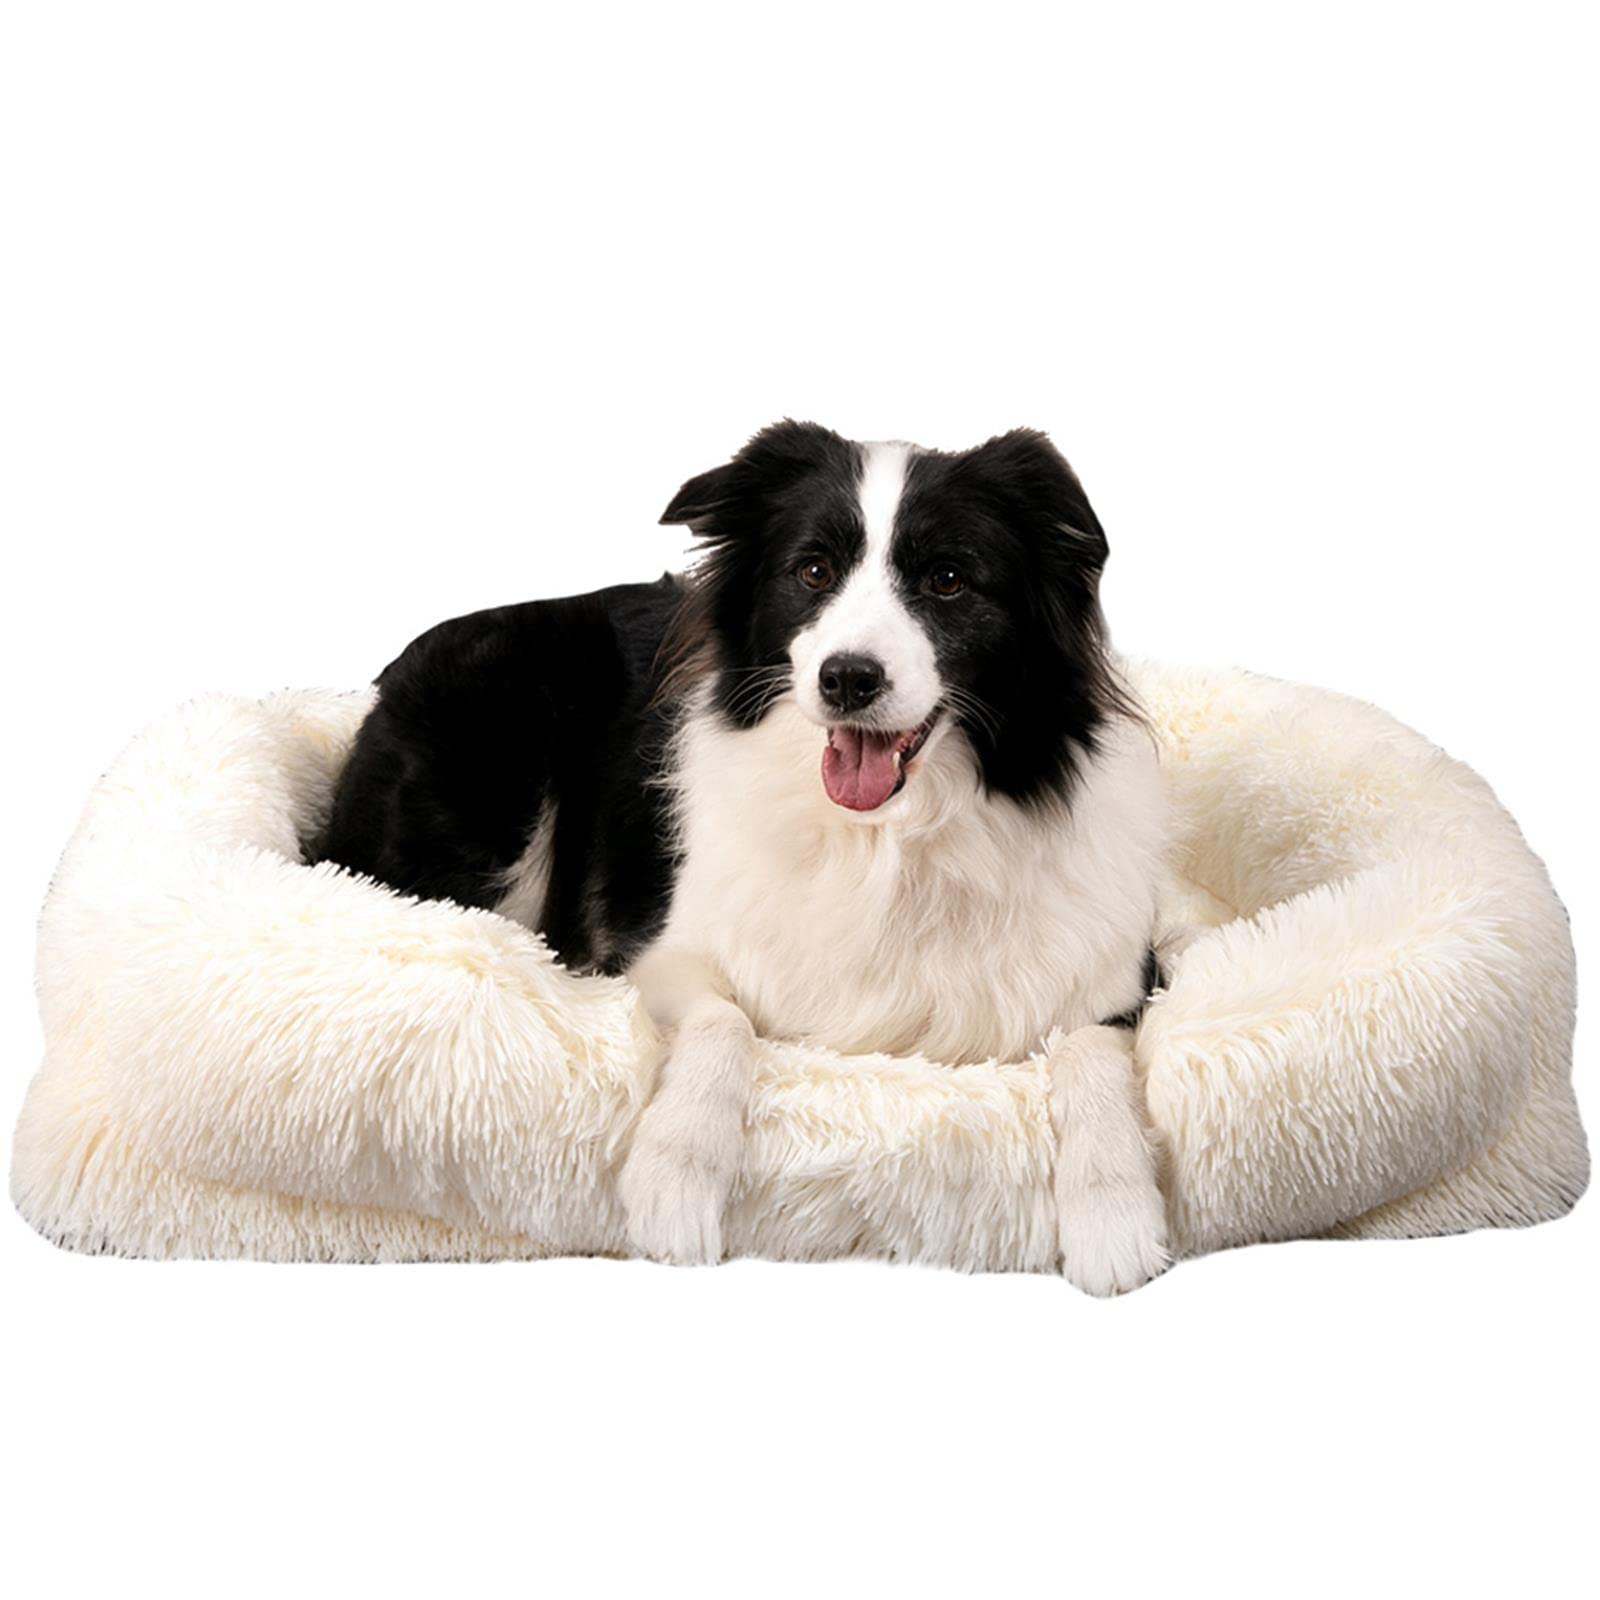 Wellyelo Large Dog Bed Cat Bed Fluffy Plush Dog Crate Beds For Large Dogs Anti-Slip Pet Bed Dog Crate Pad Sleeping Mat Machine W